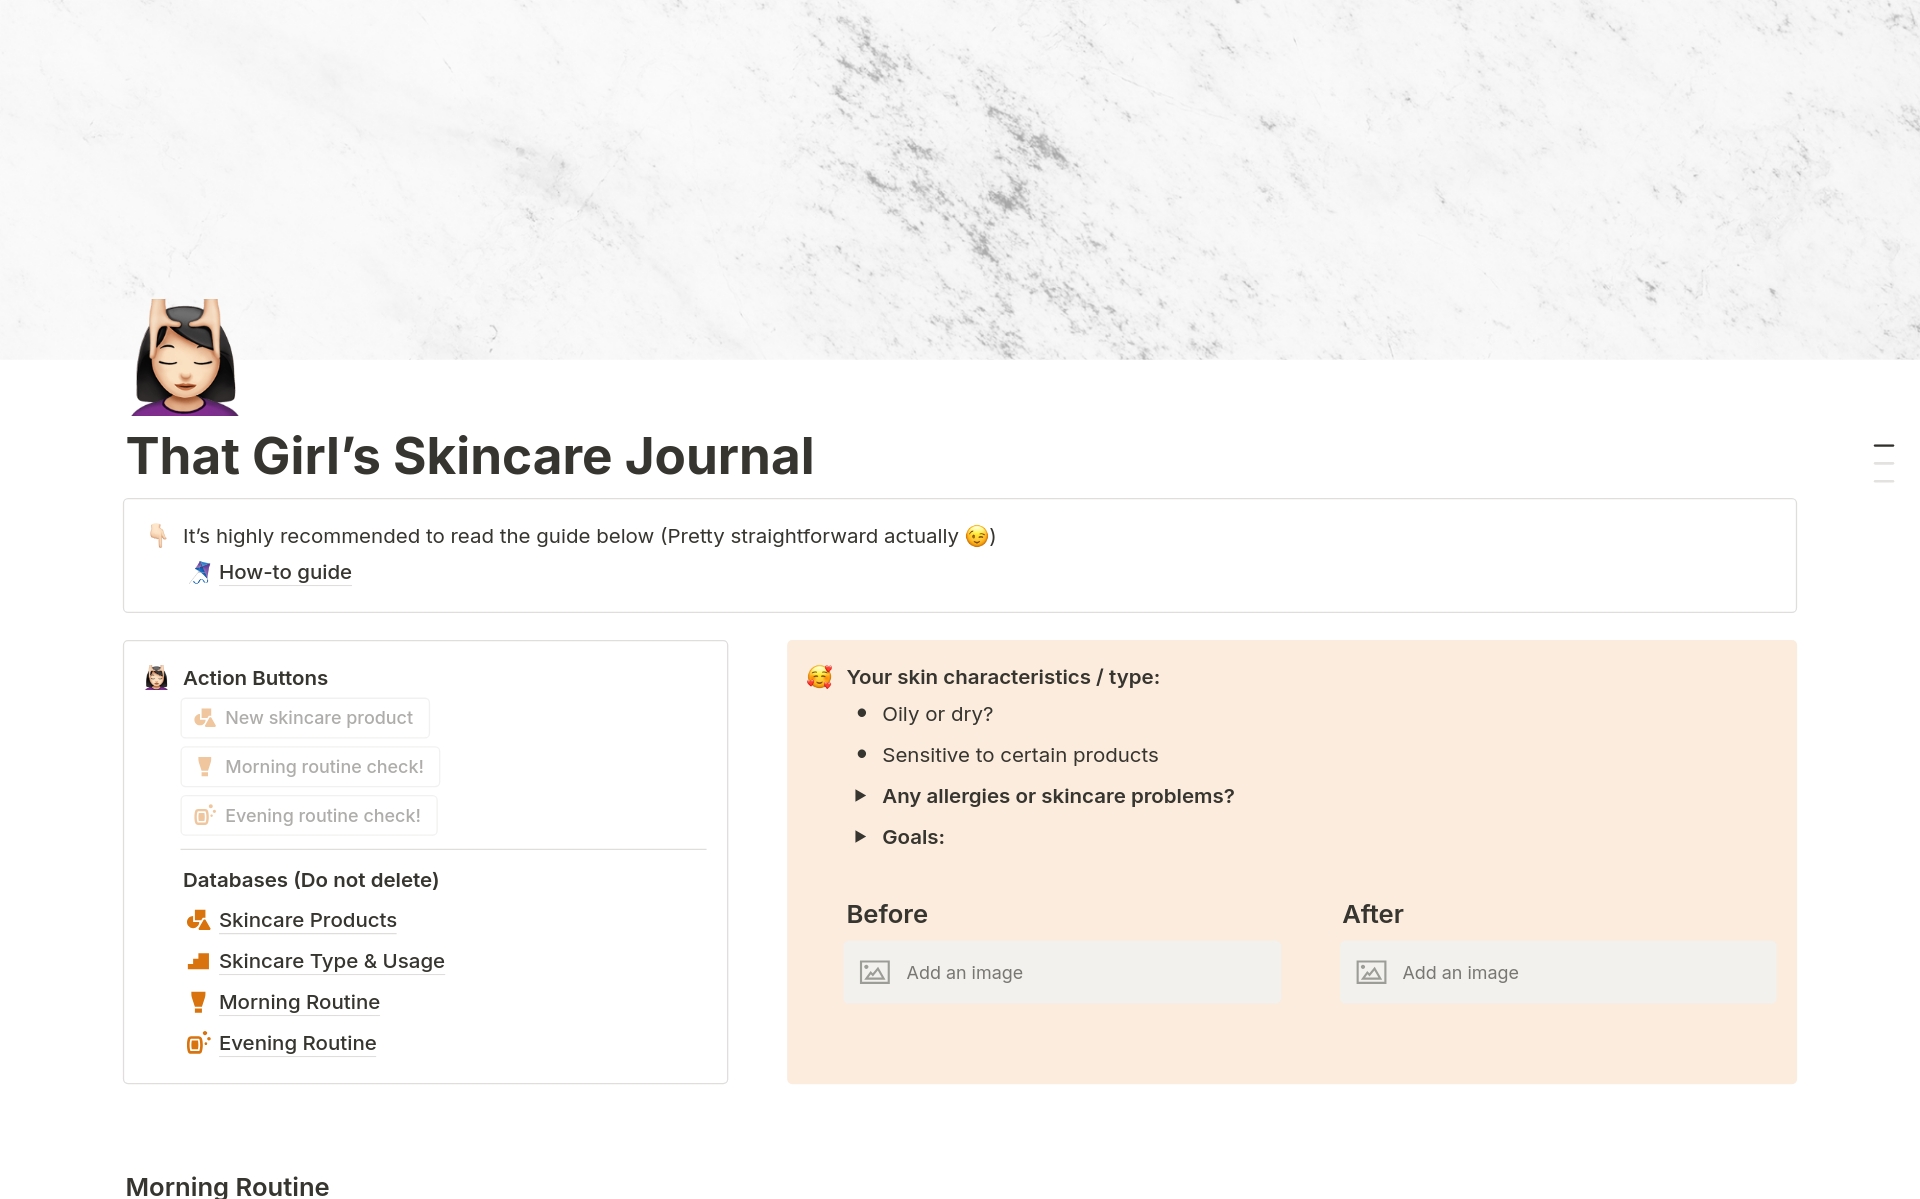 From dull to dazzling: Glow up with Notion Skincare Diary

This pre-made Notion Skincare Diary template is designed to help you track and monitor your skincare routine both in the morning and evening.

The main goal is to get you to achieve healthy, glowing skin.